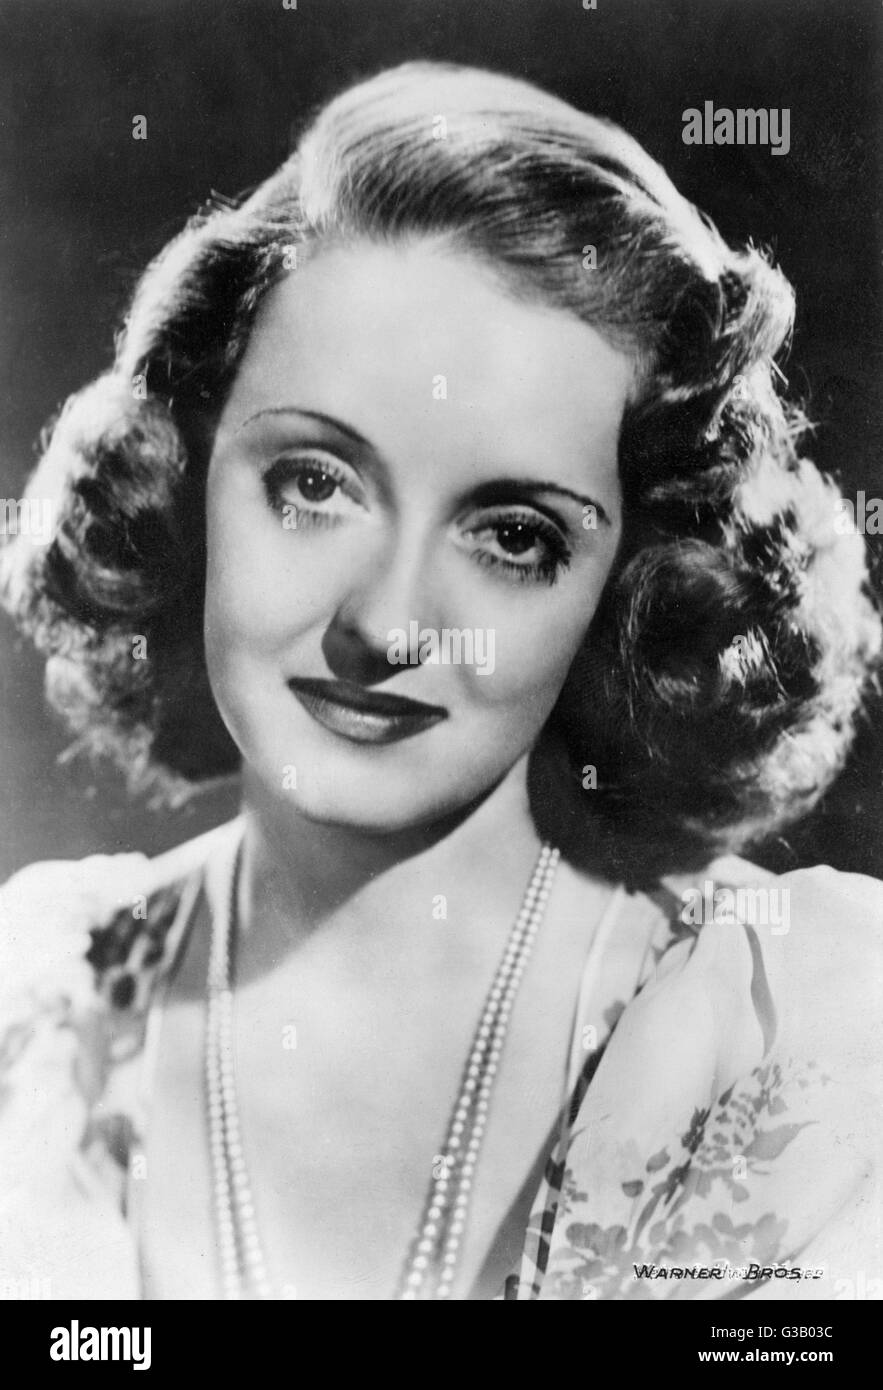 BETTE DAVIS American film actress wearing a pearl necklace Date: 1908 ...